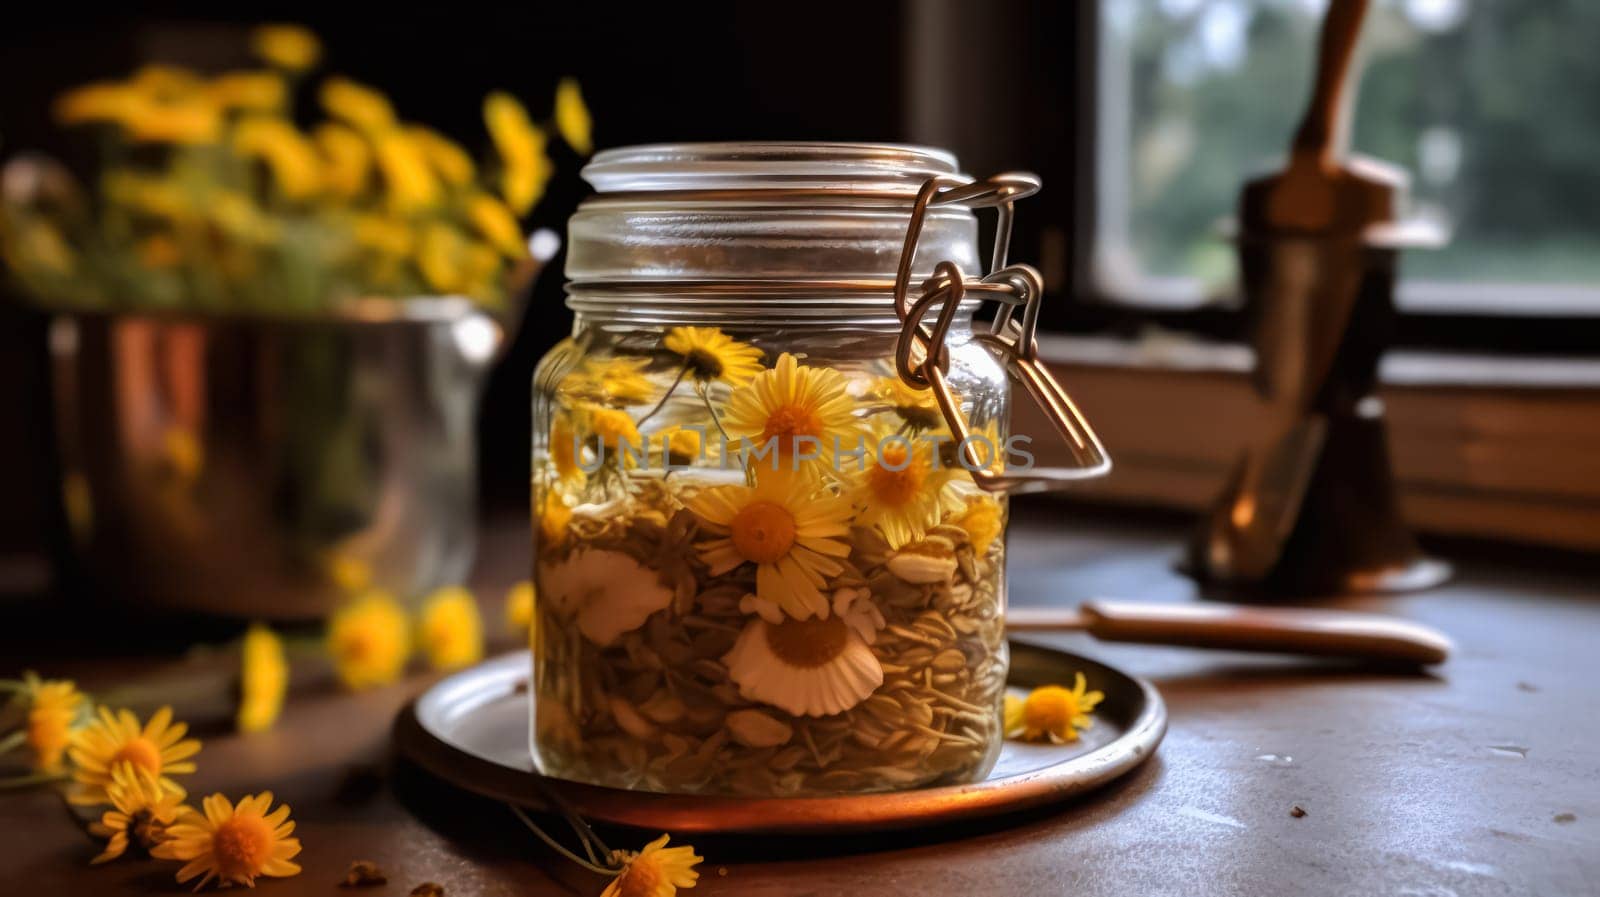 A jar filled with yellow and white flowers sits on a table next to a book. by Alla_Morozova93